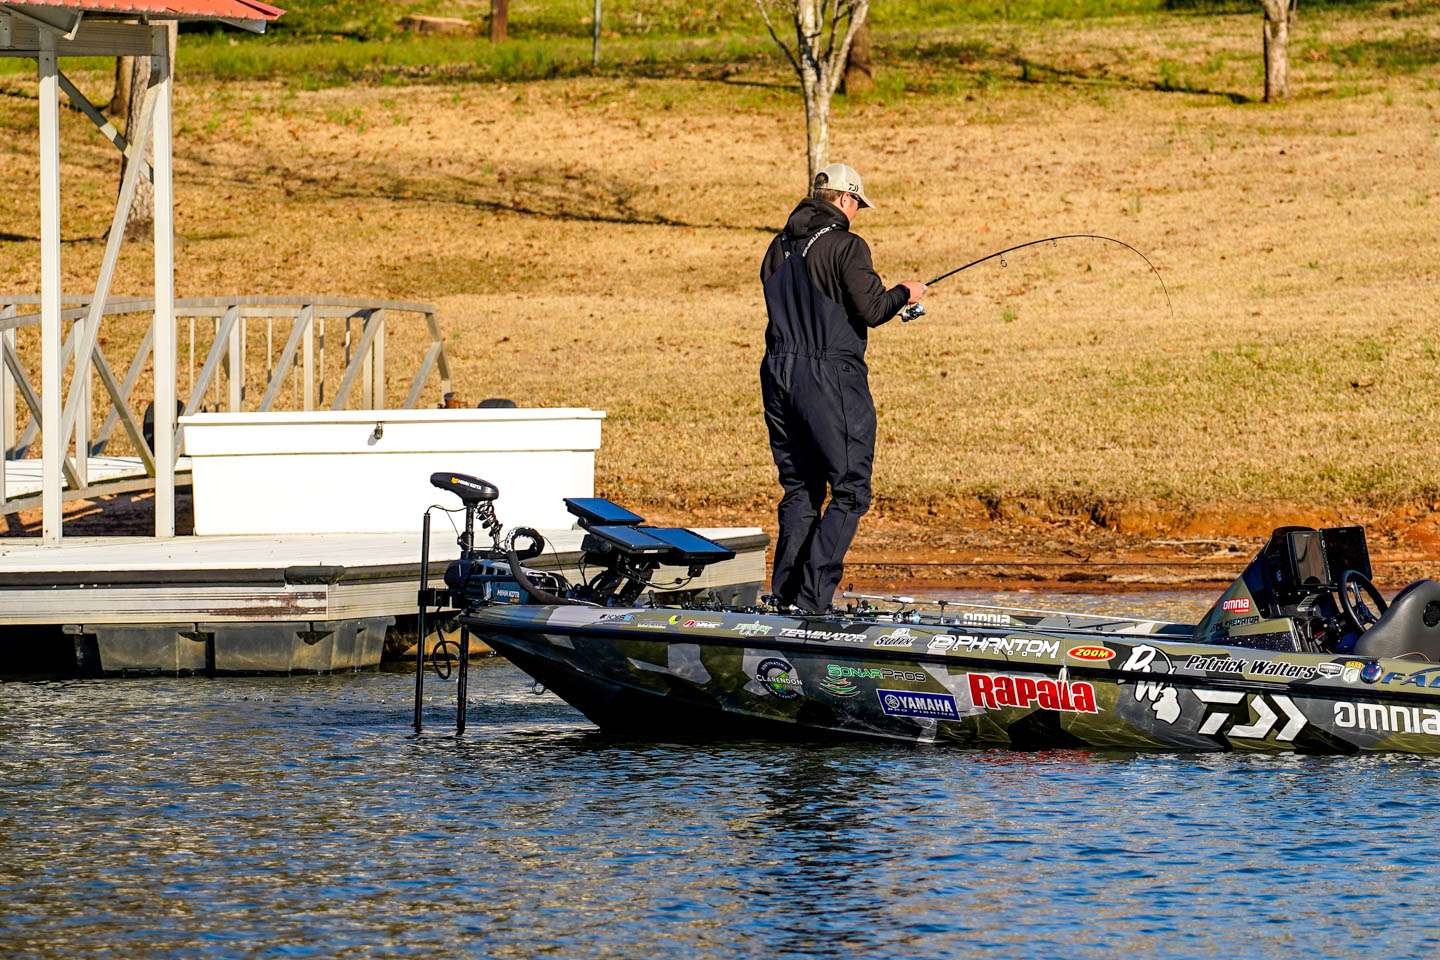 Roughly three docks in, Walters hooks up with a solid fish. 